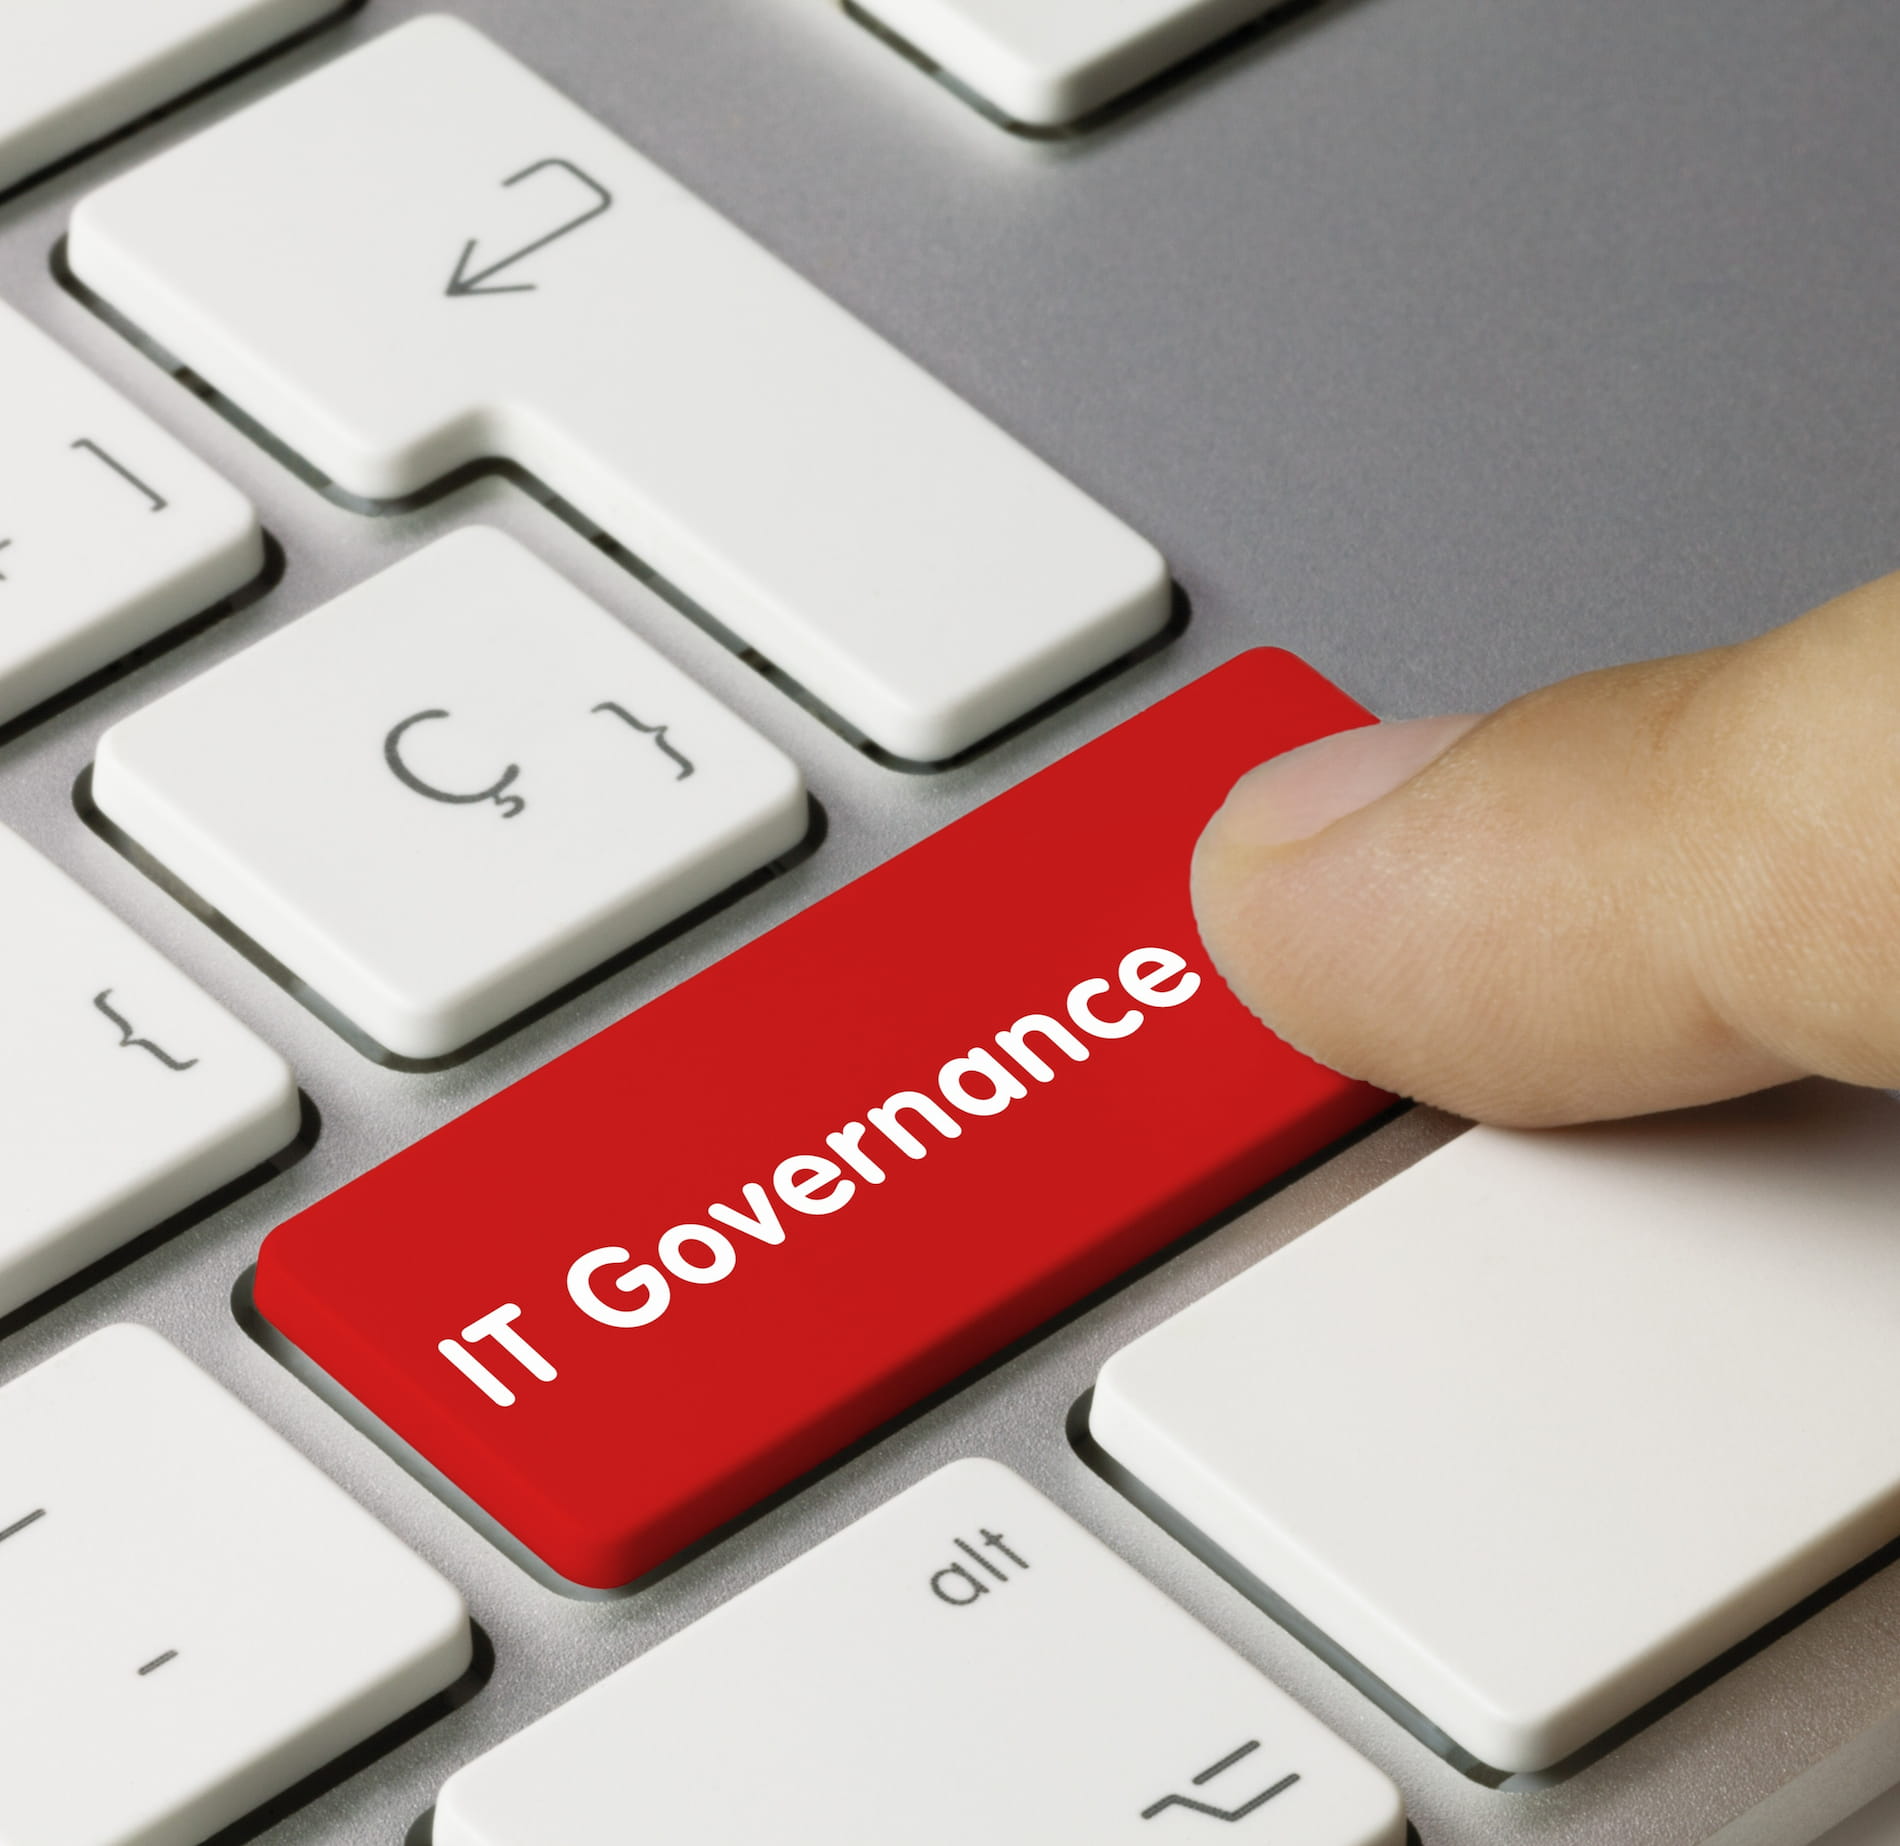 the words 'it governance' on a keyboard